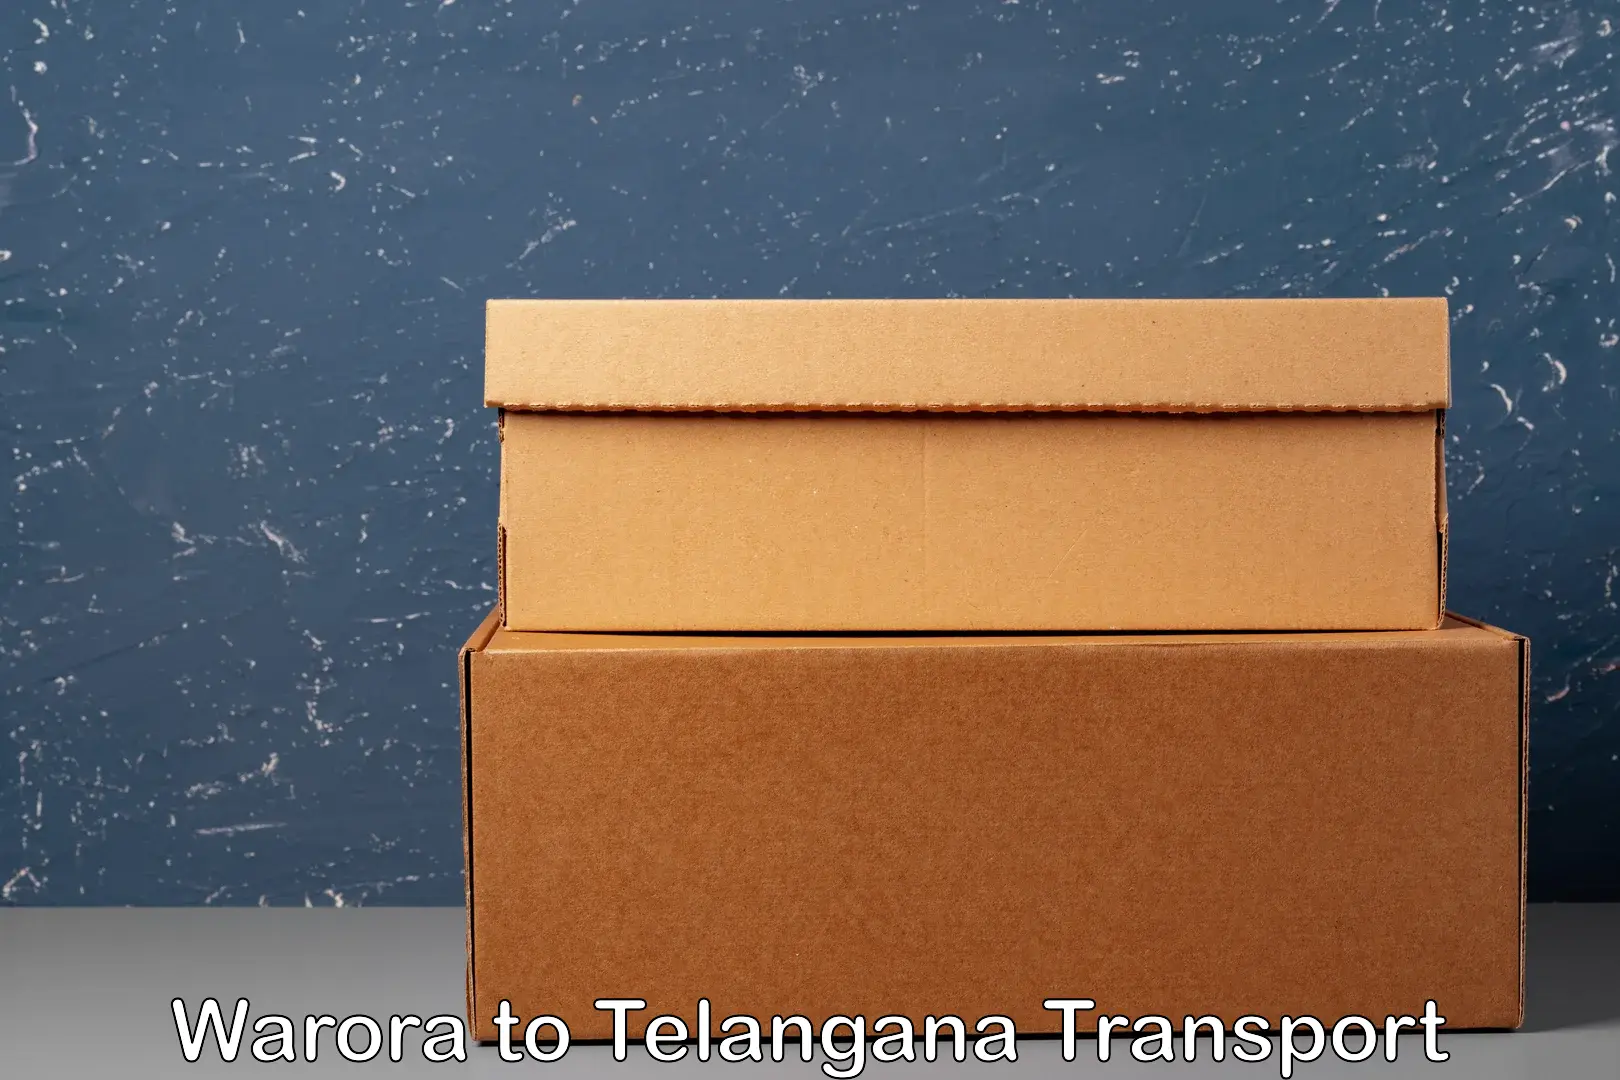 Air freight transport services in Warora to Telangana